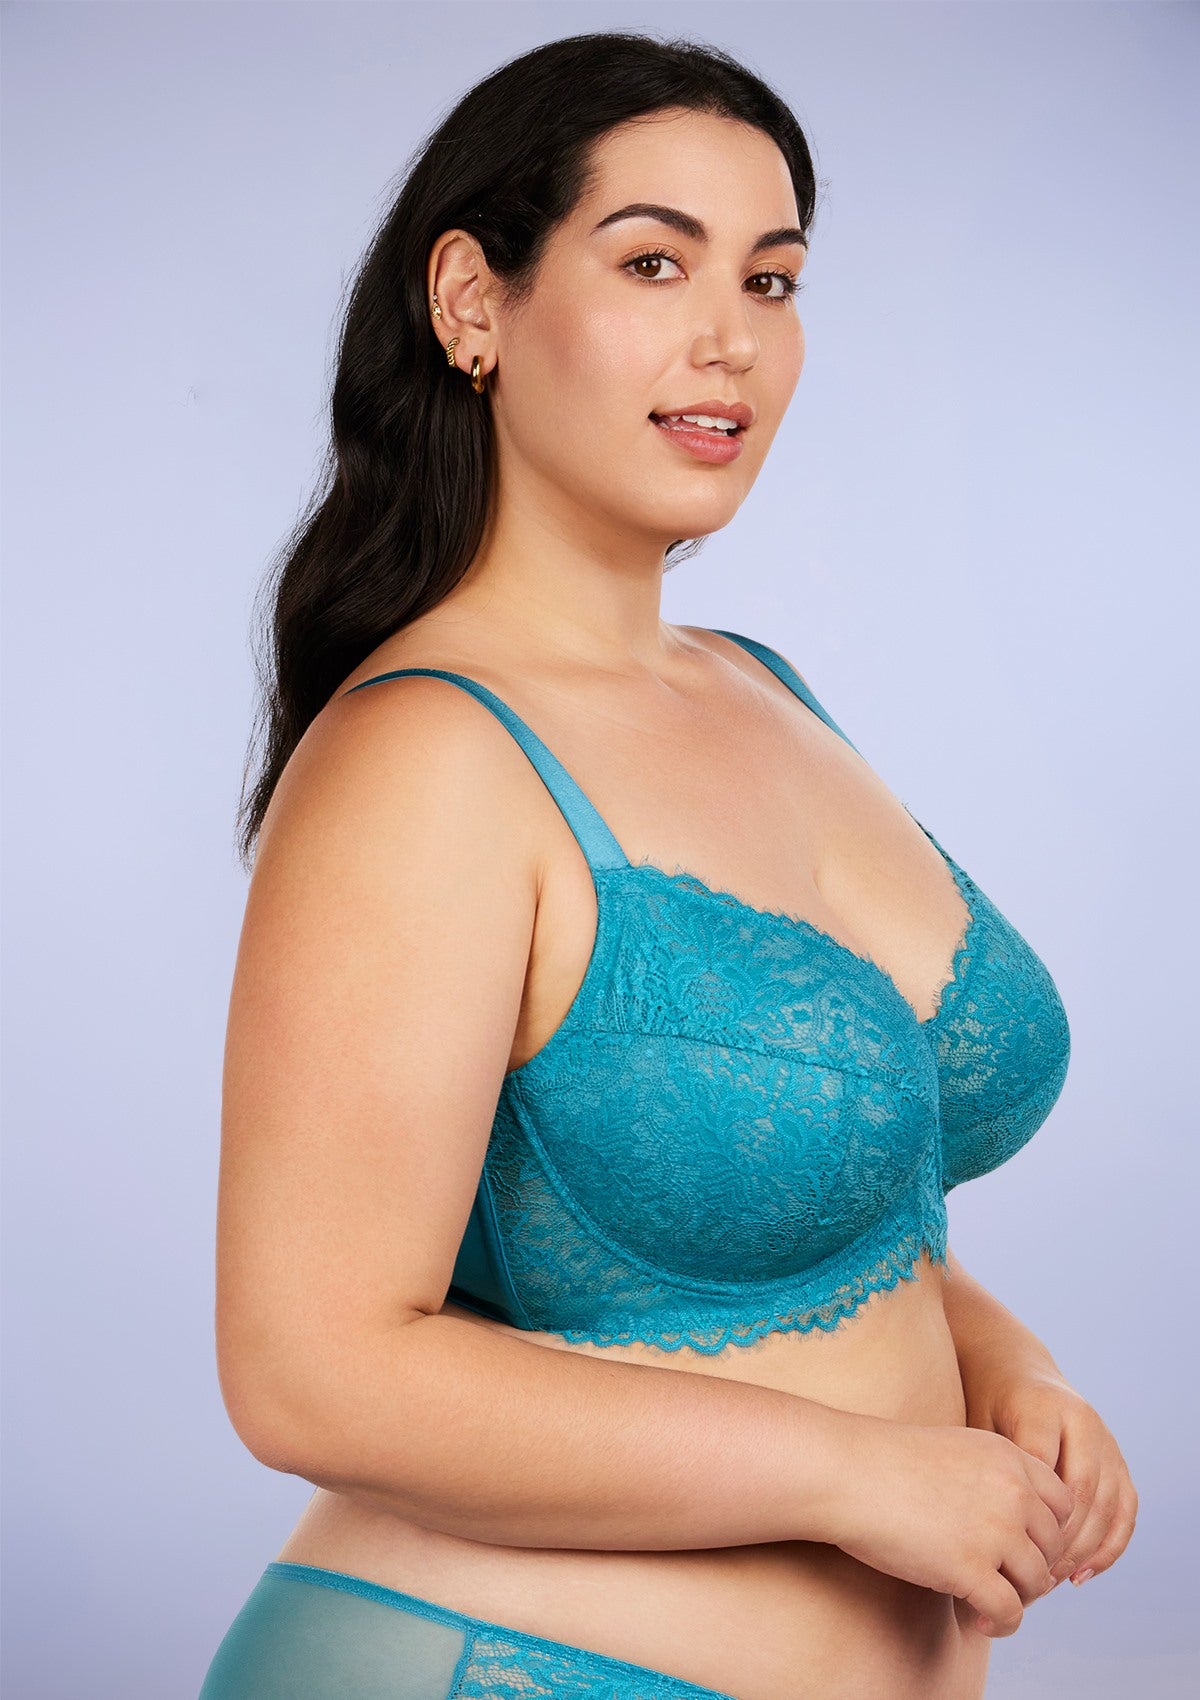 HSIA Sunflower Unlined Lace Bra: Best Bra For Wide Set Breasts - Horizon Blue / 42 / H